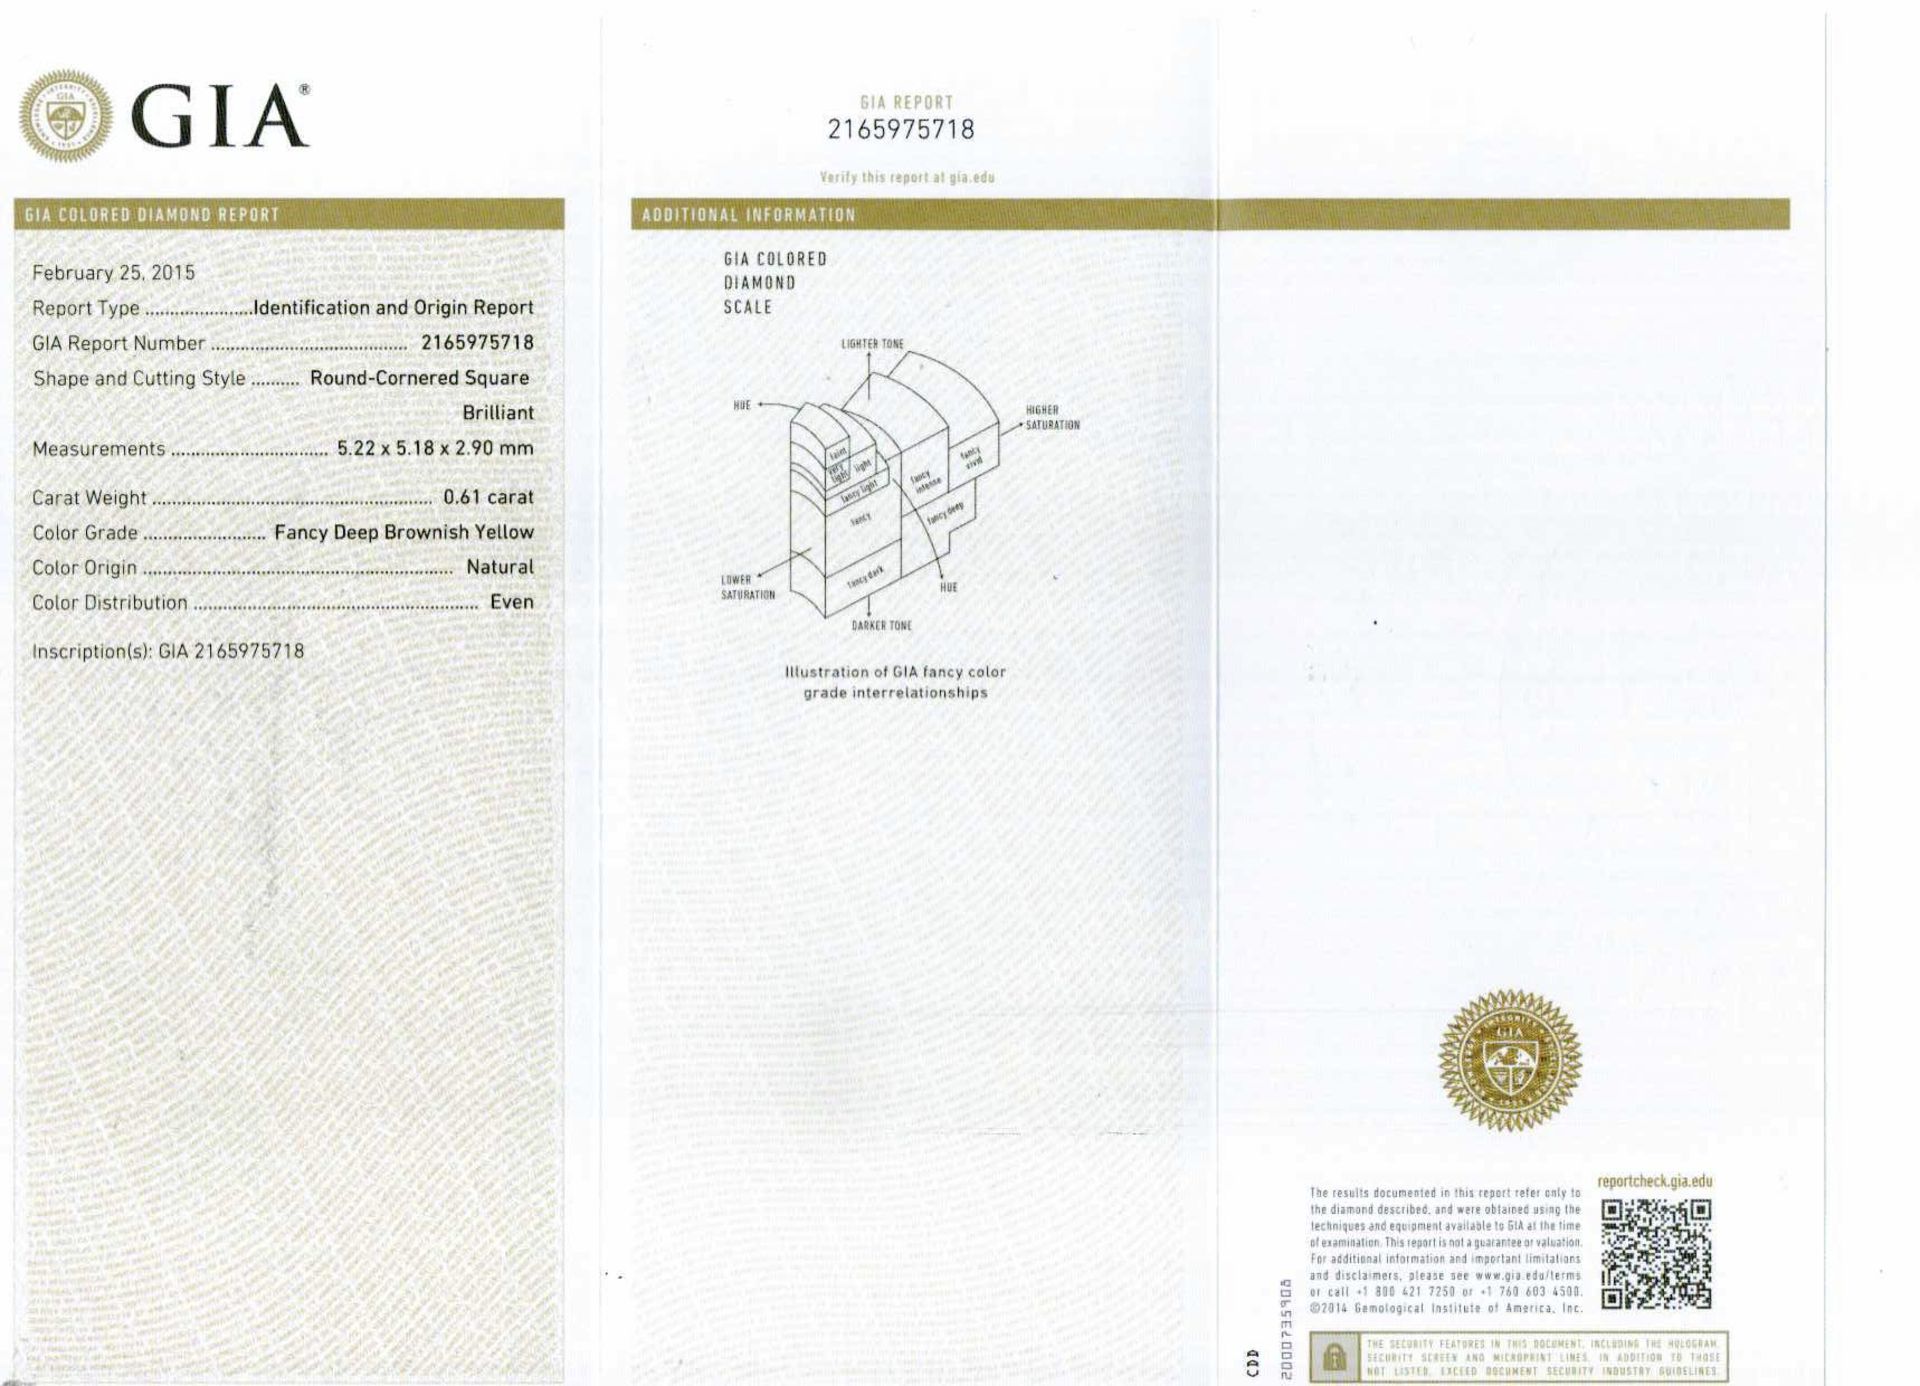 An unmounted Radiant-shaped diamond weighing app. 0.61ct - Image 2 of 2